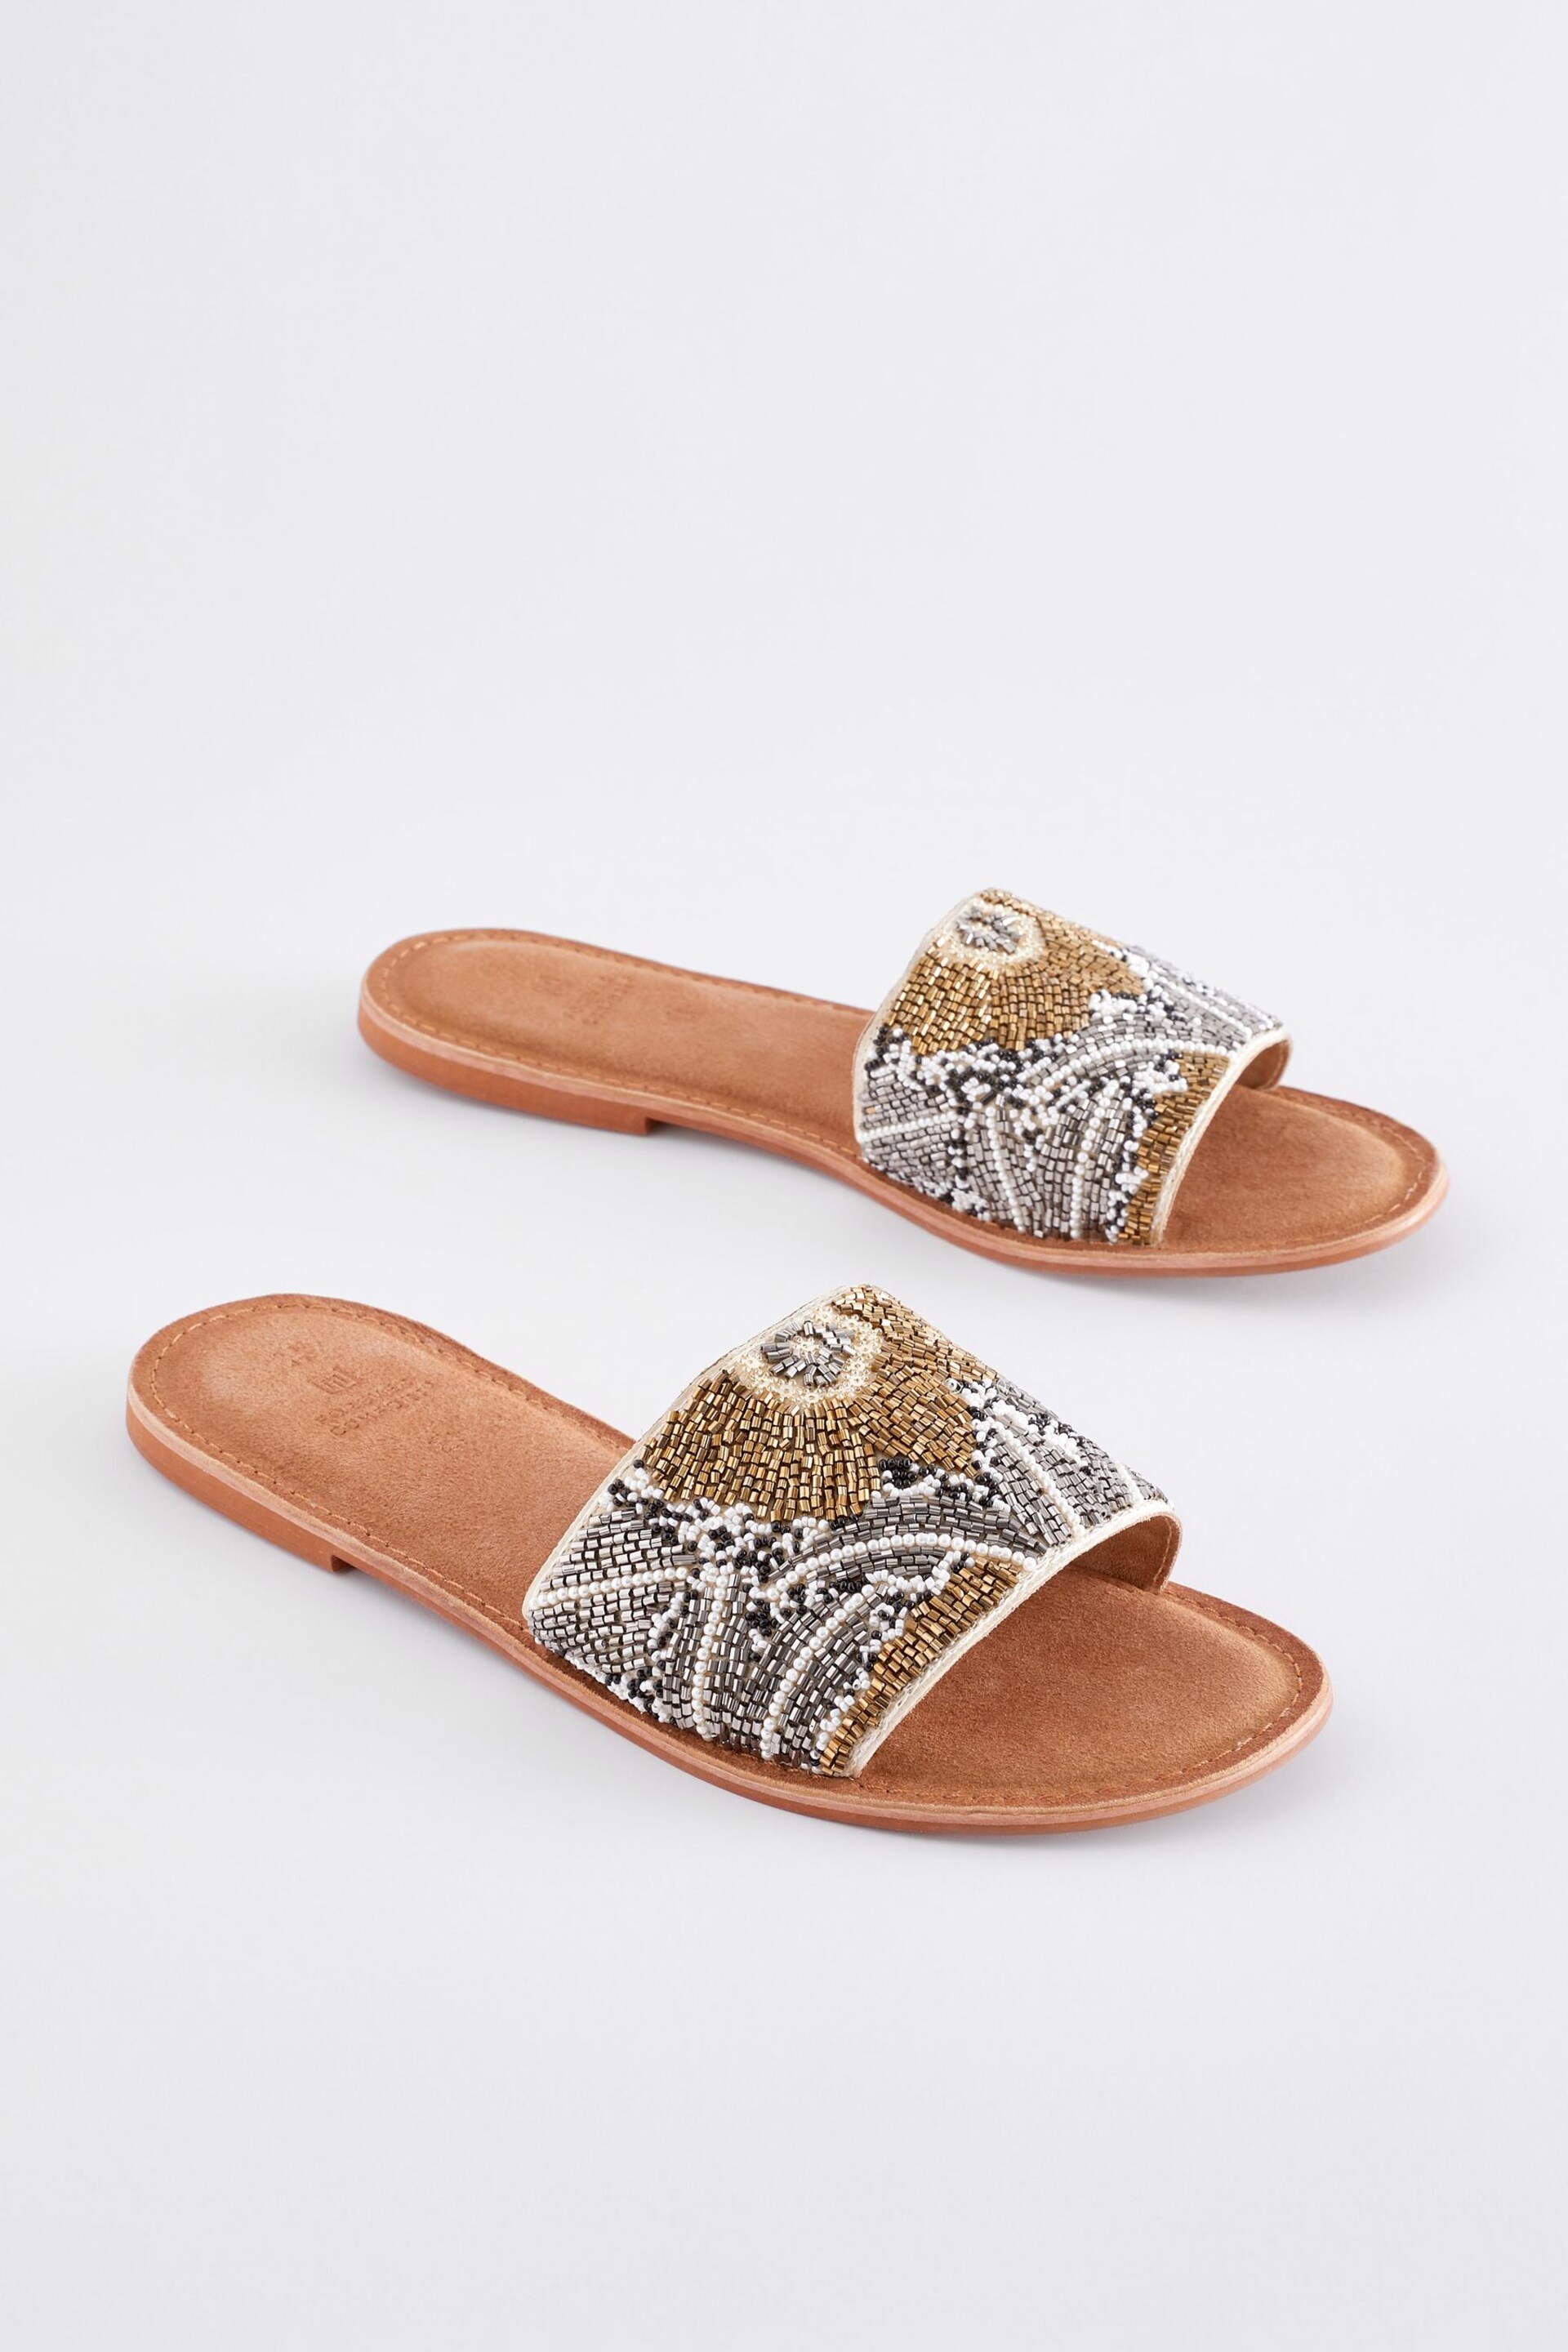 Metallic Regular/Wide Fit Forever Comfort® Leather Beaded Mules - Image 1 of 6